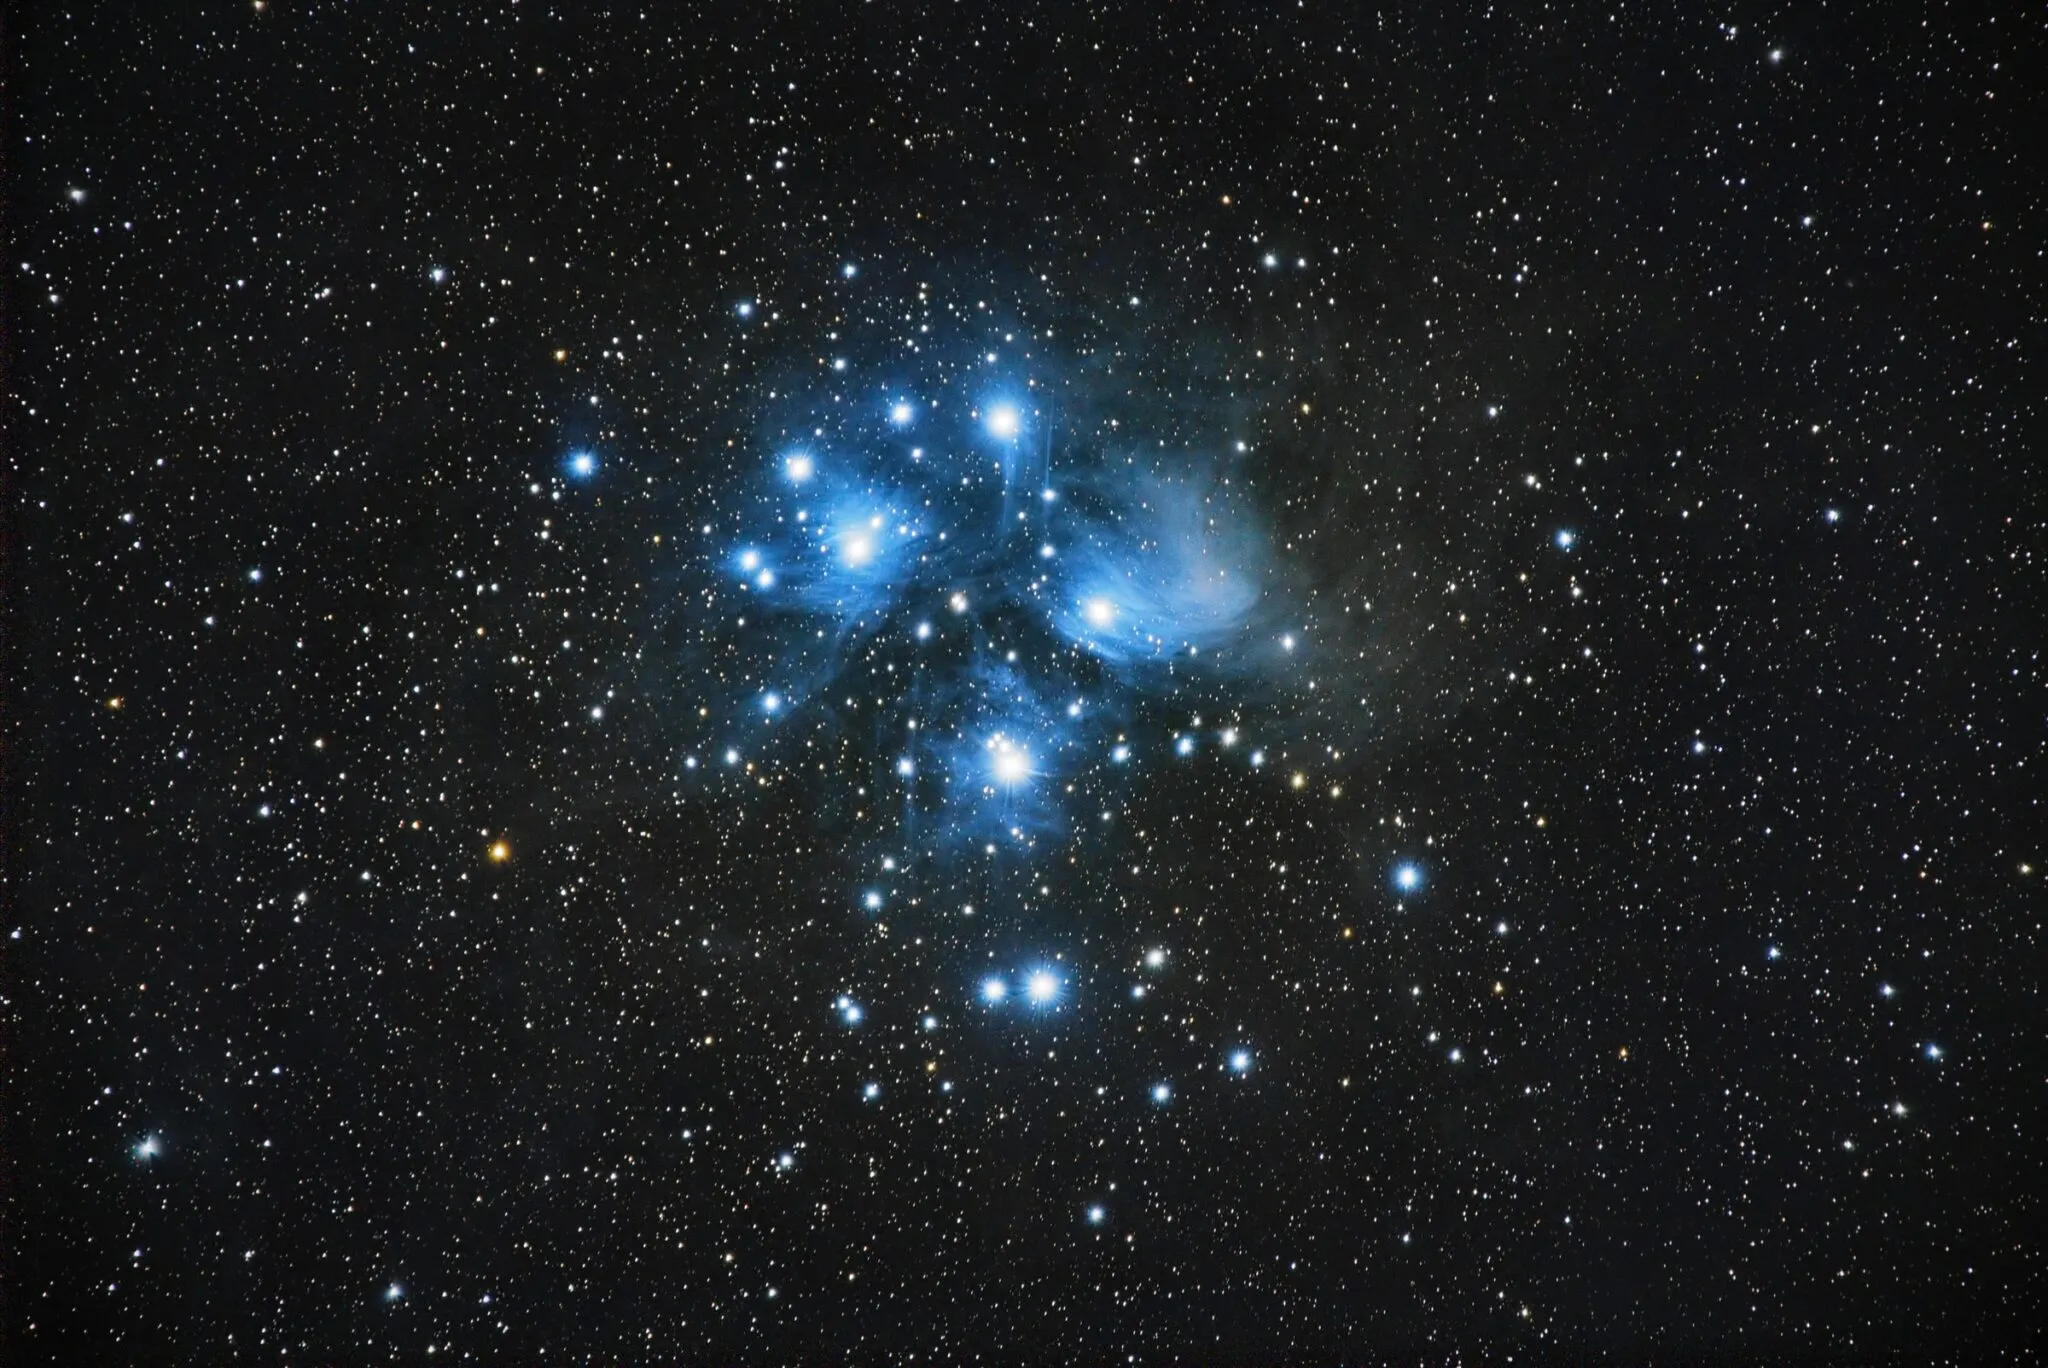 How to Find and Observe The Pleiades, M45